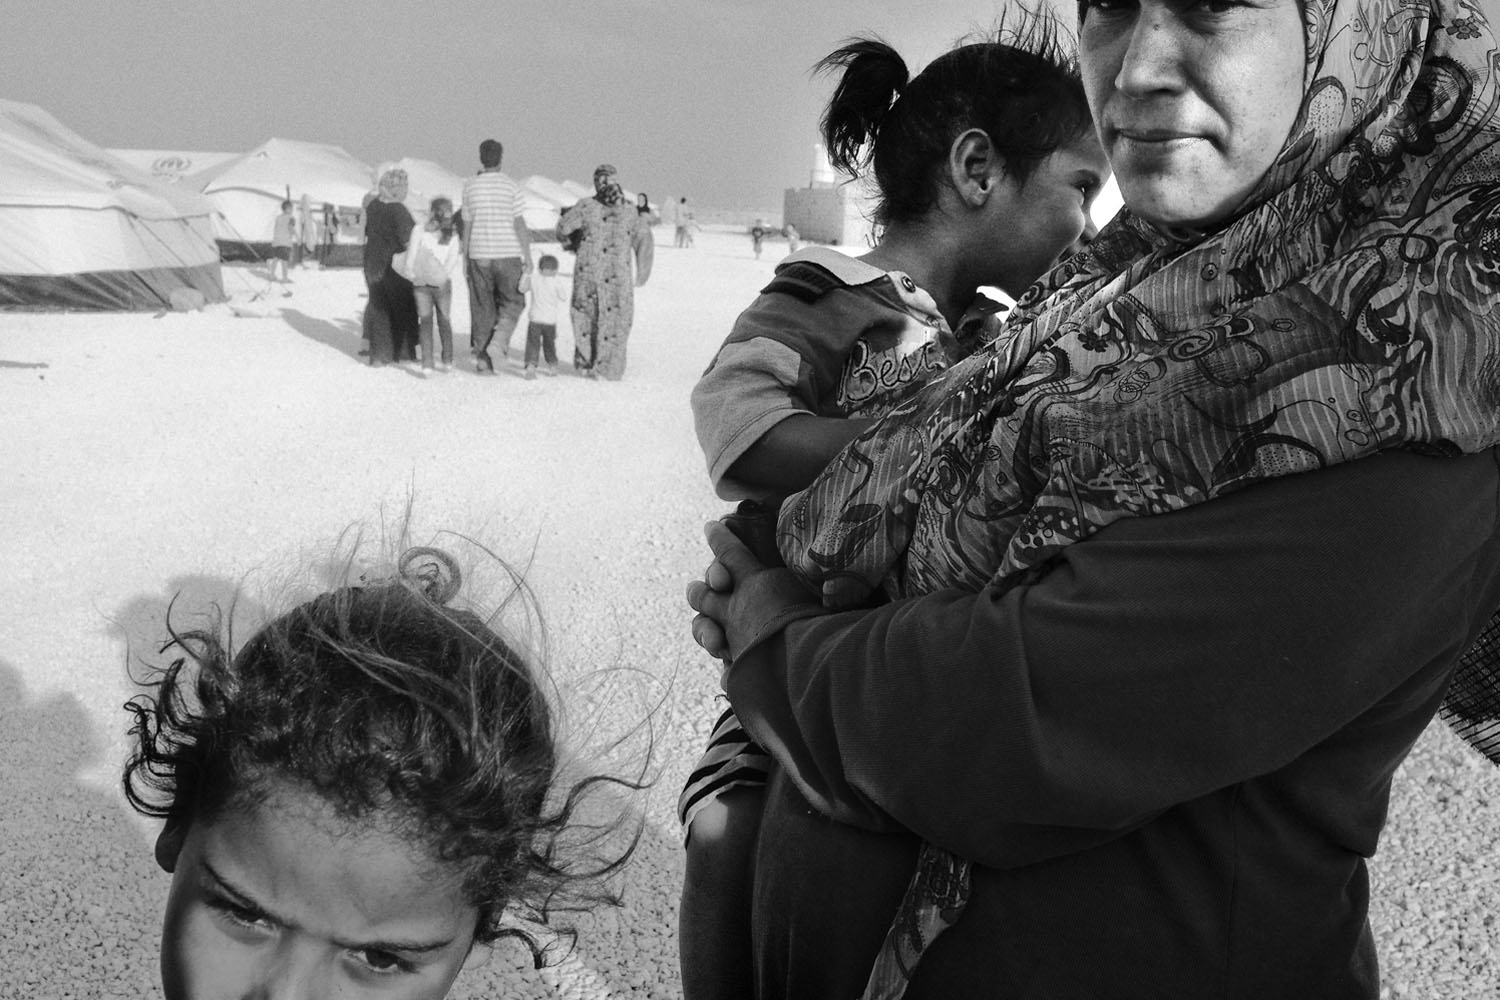 JORDAN. Zaatari, Refugee Camp. August 30, 2012. Syrian refugees, mostly women and children, at the Zaatari refugee camp near the Syrian border in Jordan. Contact email:New York : photography@magnumphotos.comParis : magnum@magnumphotos.frLondon : magnum@magnumphotos.co.ukTokyo : tokyo@magnumphotos.co.jpContact phones:New York : +1 212 929 6000Paris: + 33 1 53 42 50 00London: + 44 20 7490 1771Tokyo: + 81 3 3219 0771Image URL:http://www.magnumphotos.com/Archive/C.aspx?VP3=ViewBox_VPage&IID=2K7O3RKH34UF&CT=Image&IT=ZoomImage01_VForm